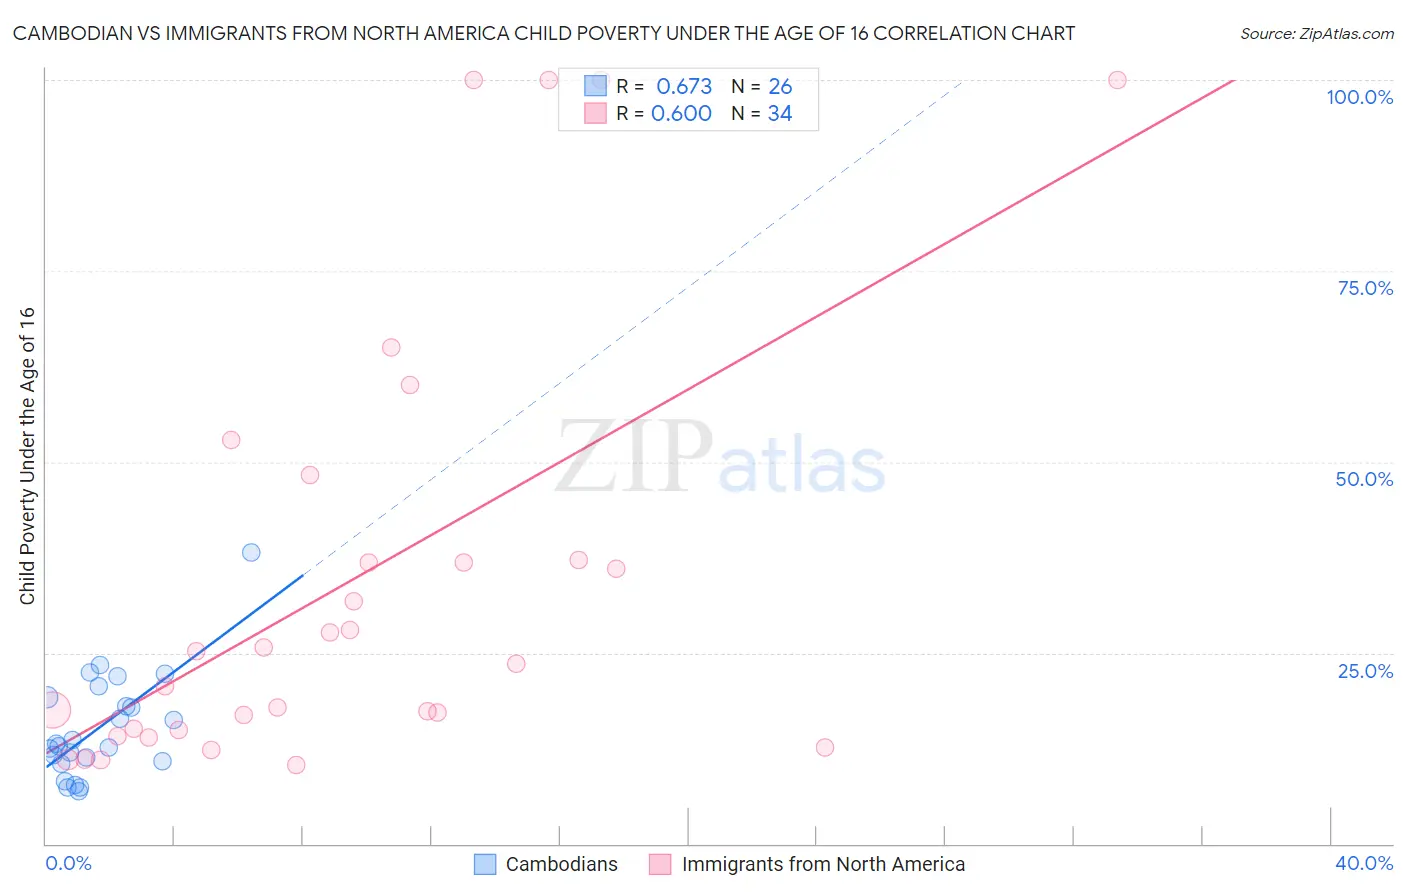 Cambodian vs Immigrants from North America Child Poverty Under the Age of 16